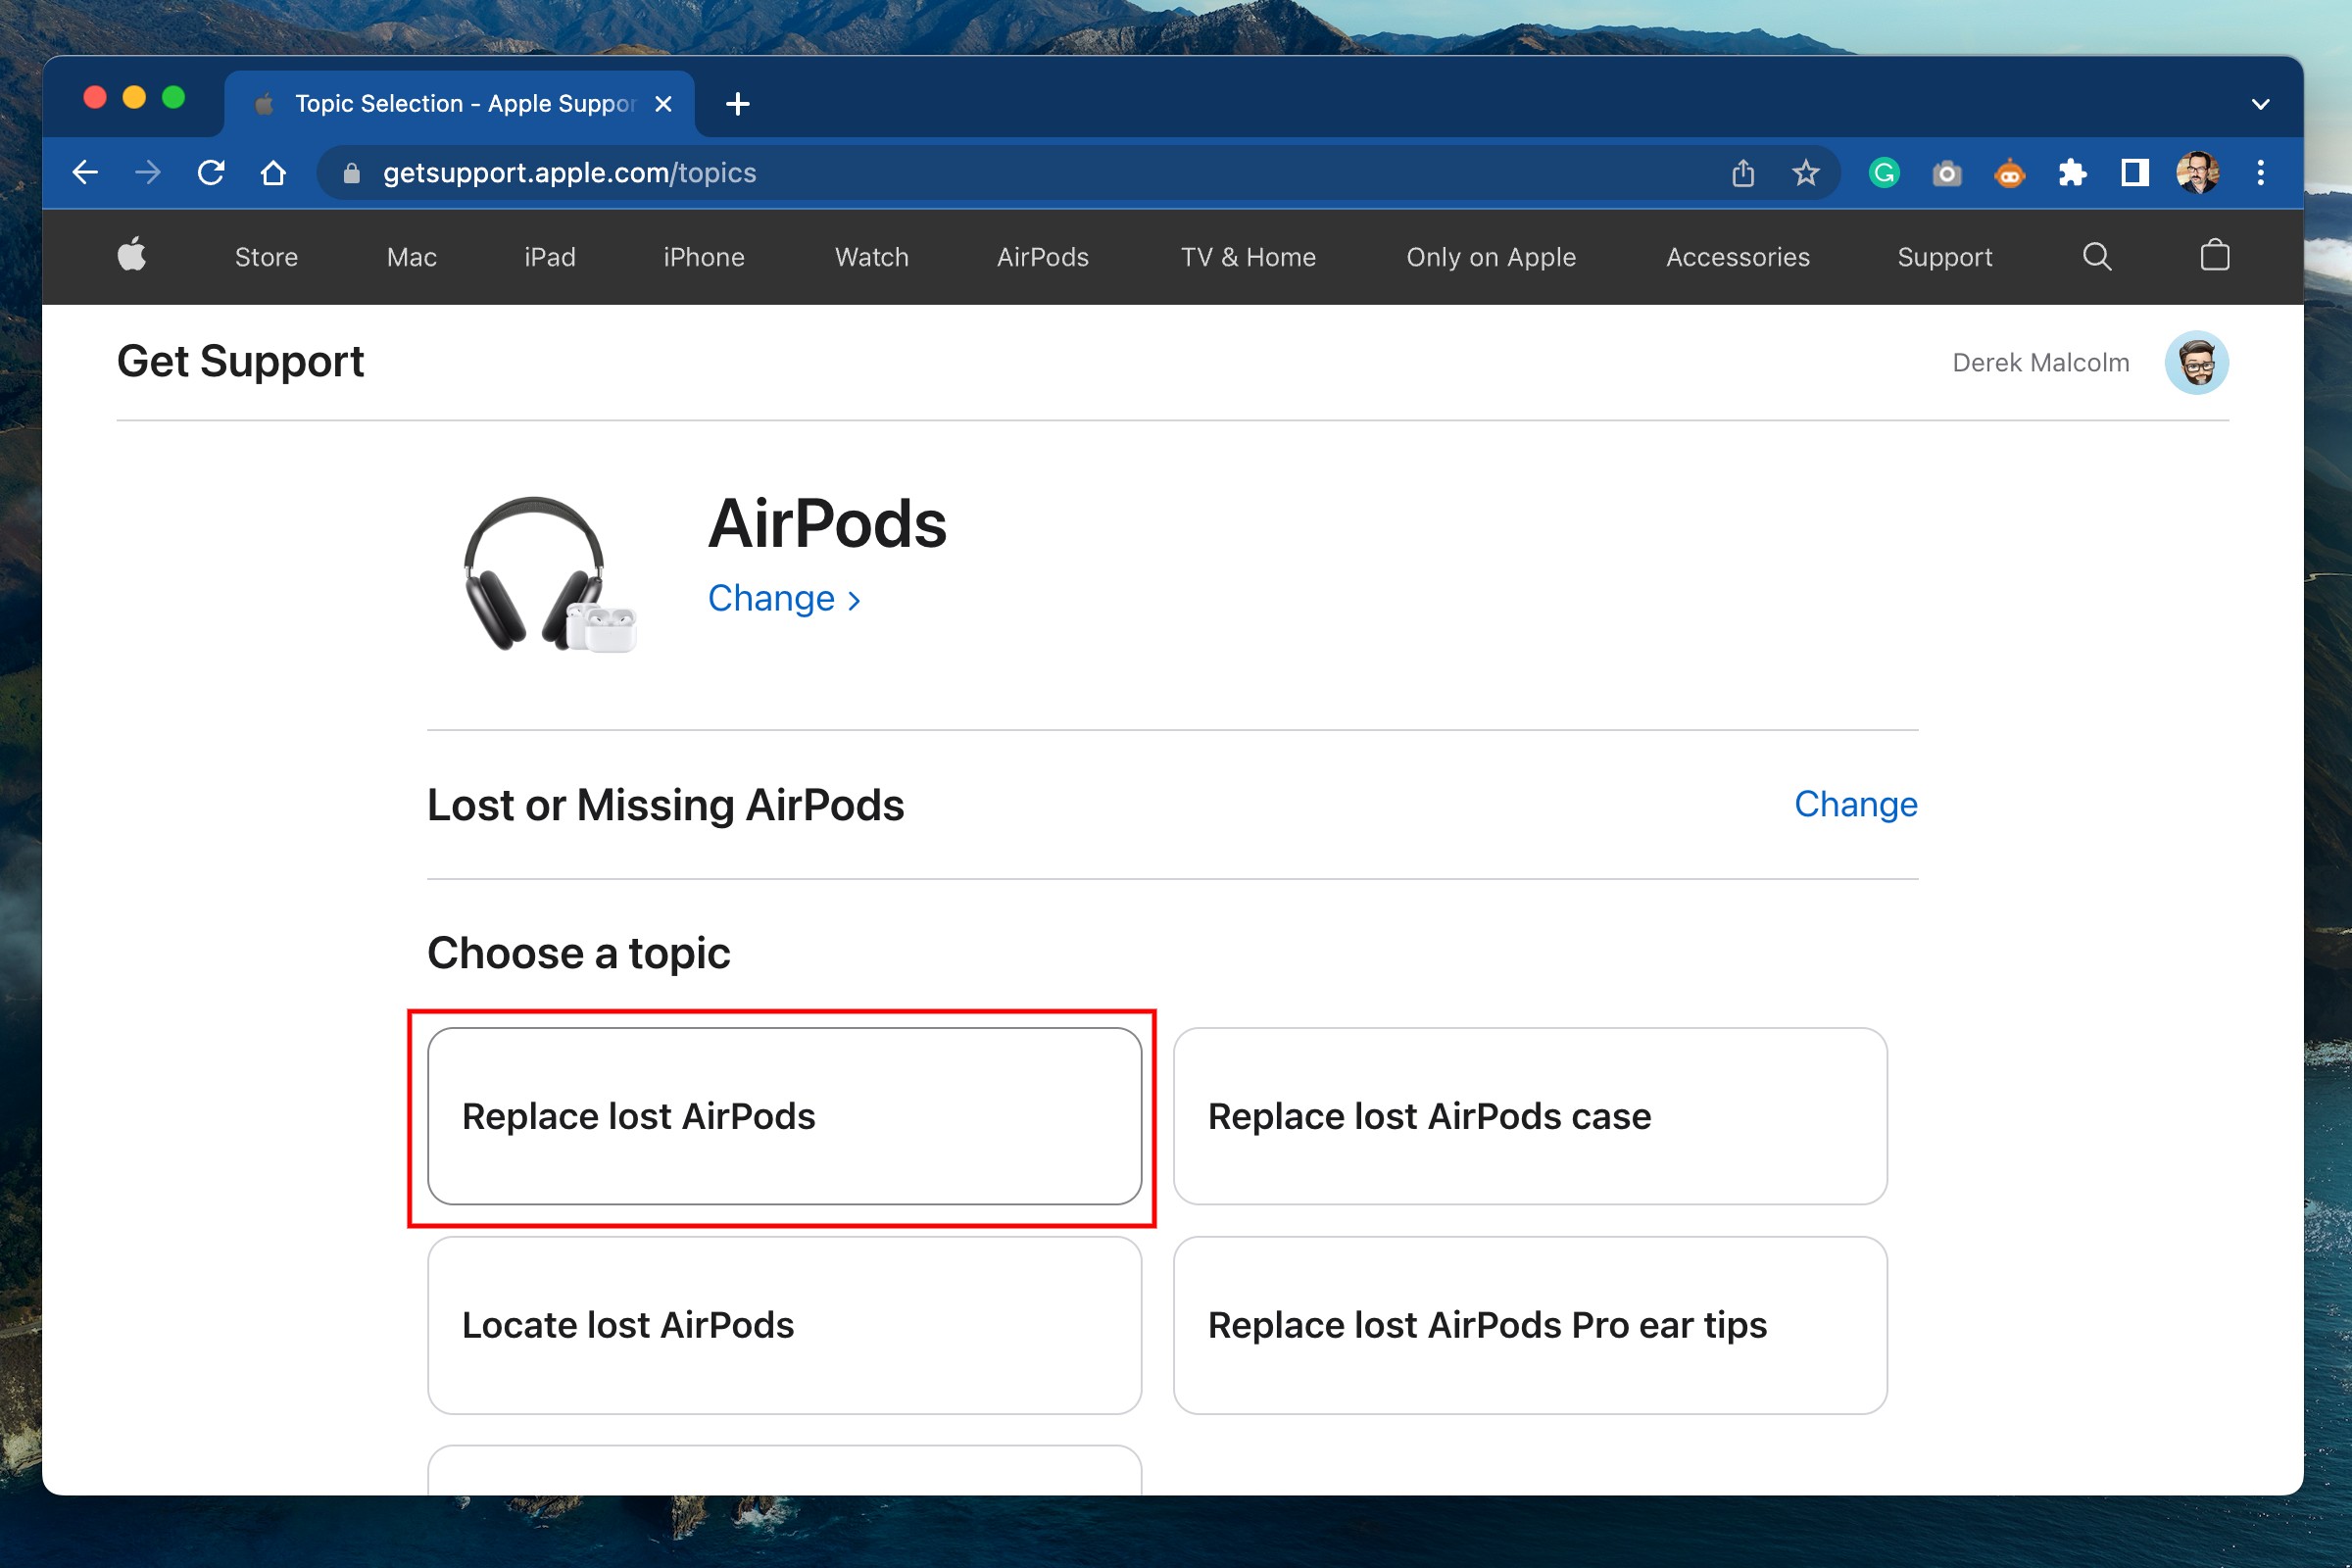 Steps to replace lost or missing AirPods.